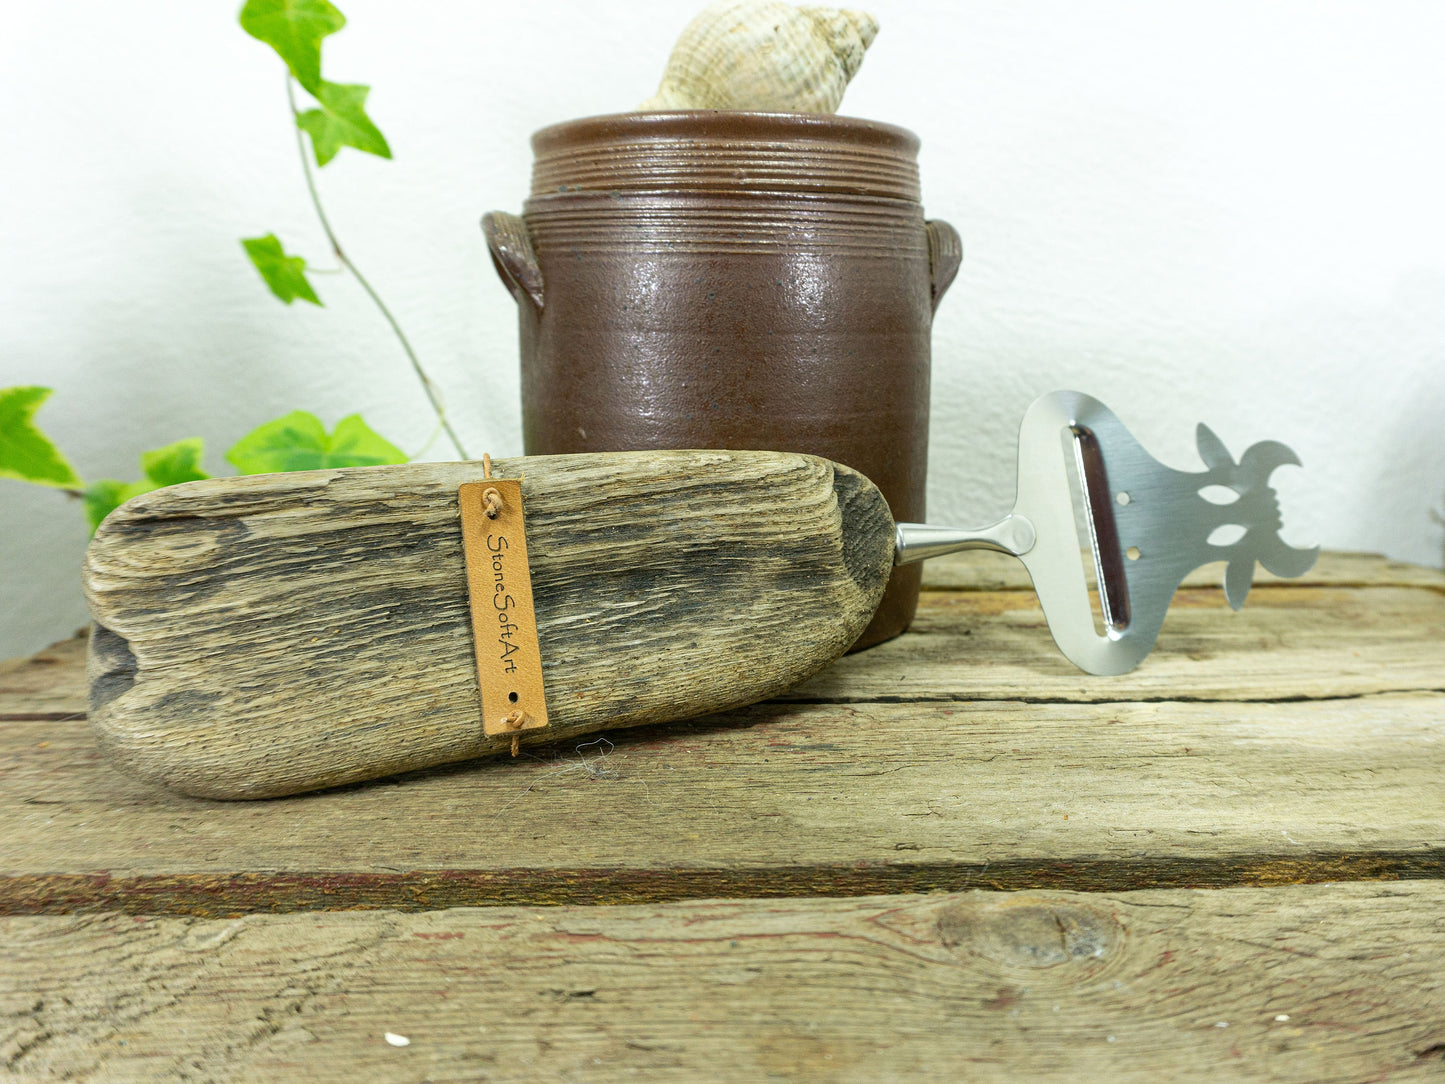 CHEESE SLICER 'Cow Carla' with DRIFTWOOD handle, cow cutlery, handcrafted by StoneSoftArt